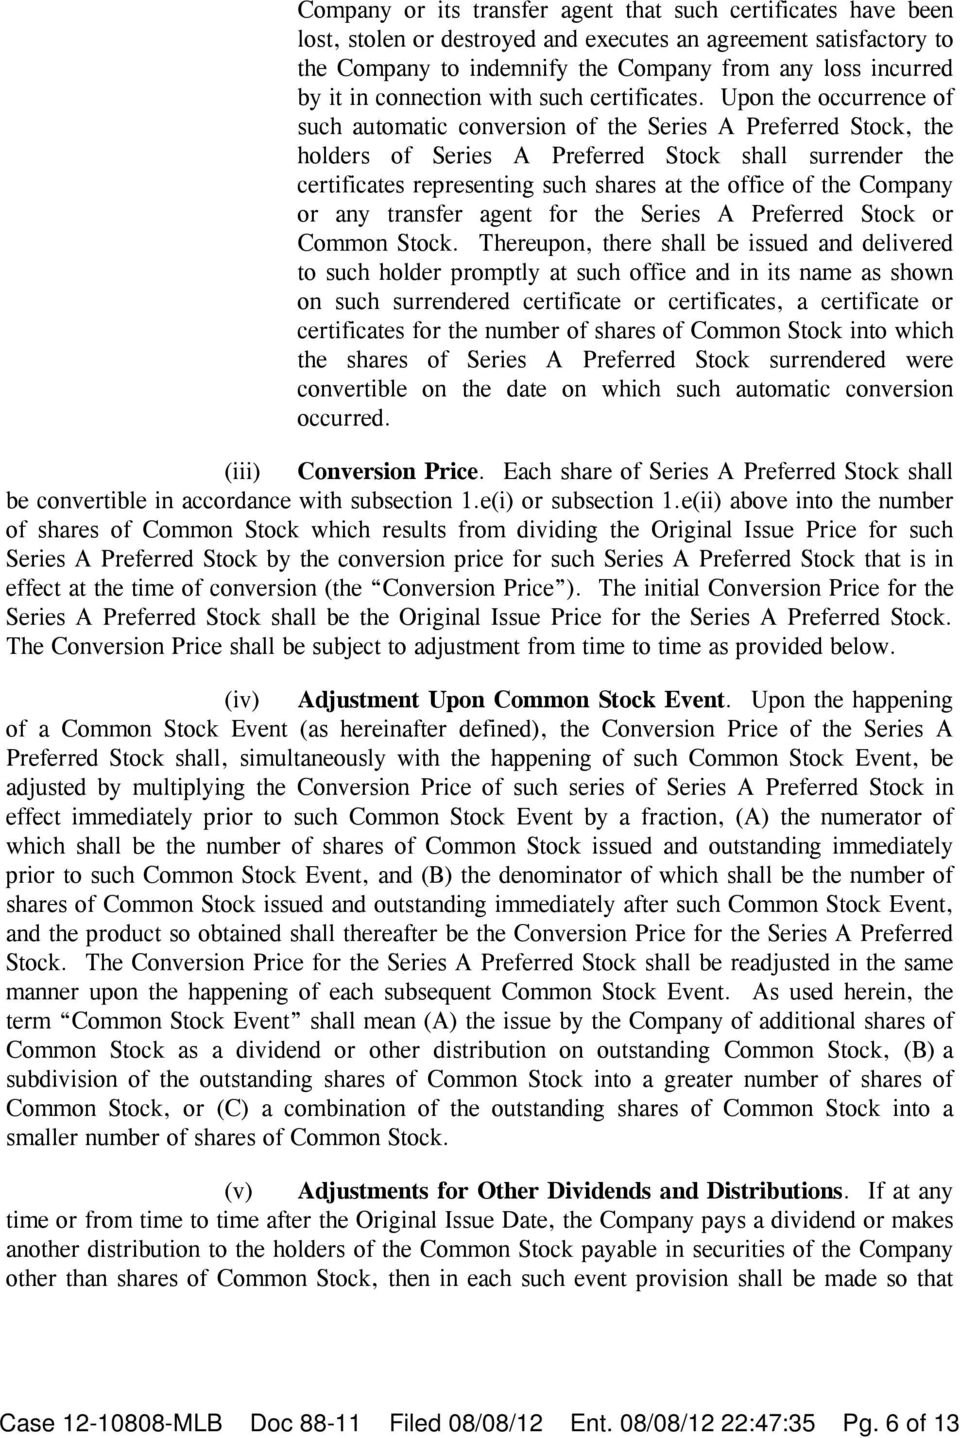 Upon the occurrence of such automatic conversion of the Series A Preferred Stock, the holders of Series A Preferred Stock shall surrender the certificates representing such shares at the office of